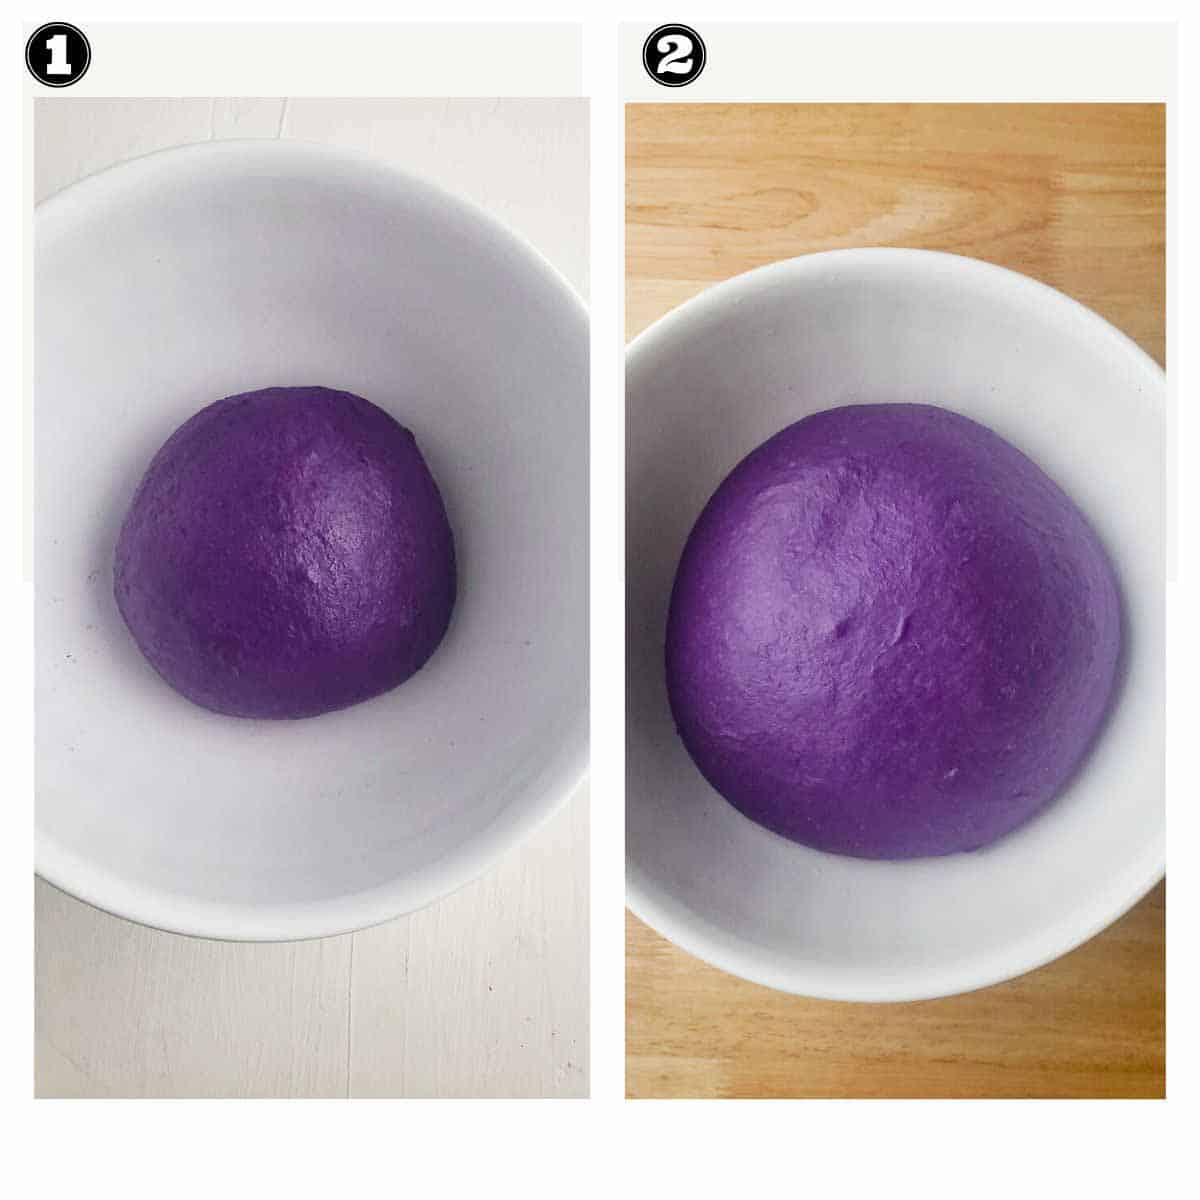 stages of bulk fermenting the dough